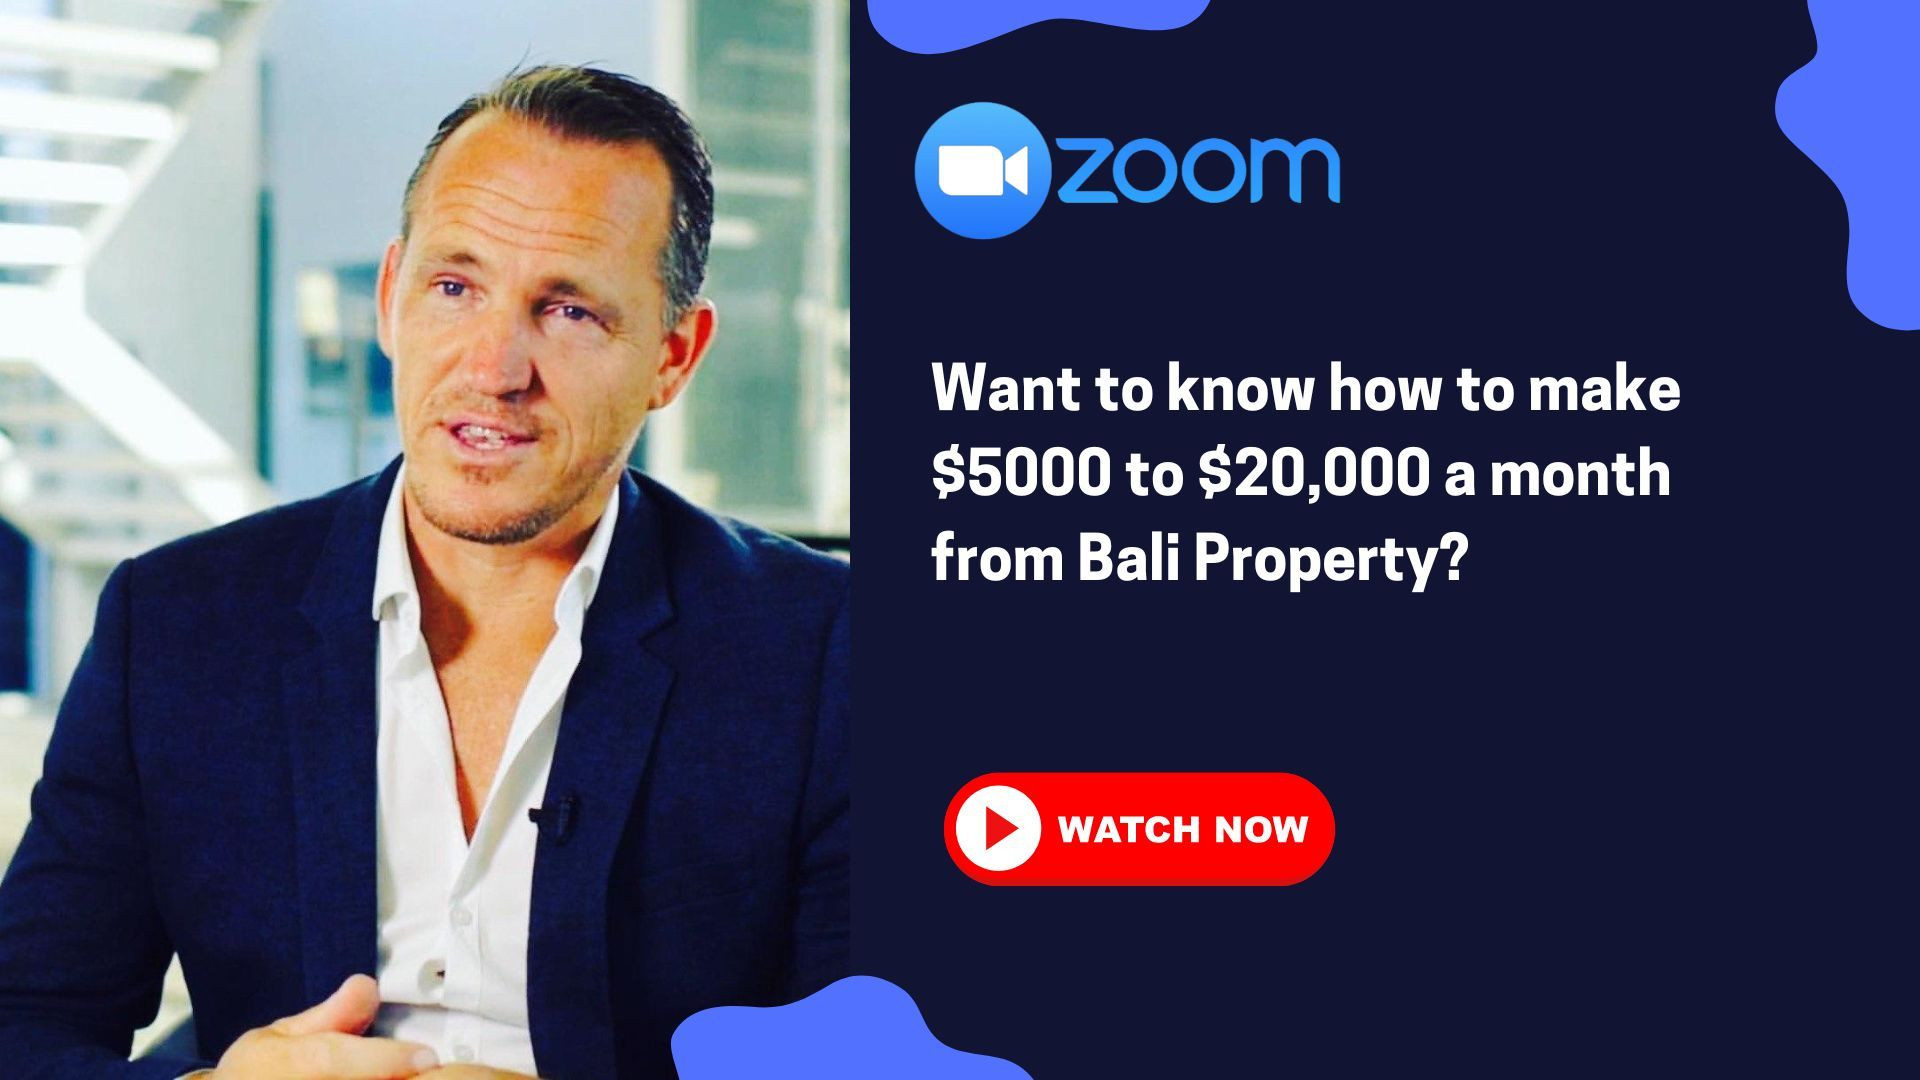 Want to know how to make $5000 to $20,000 a month from Bali Property?